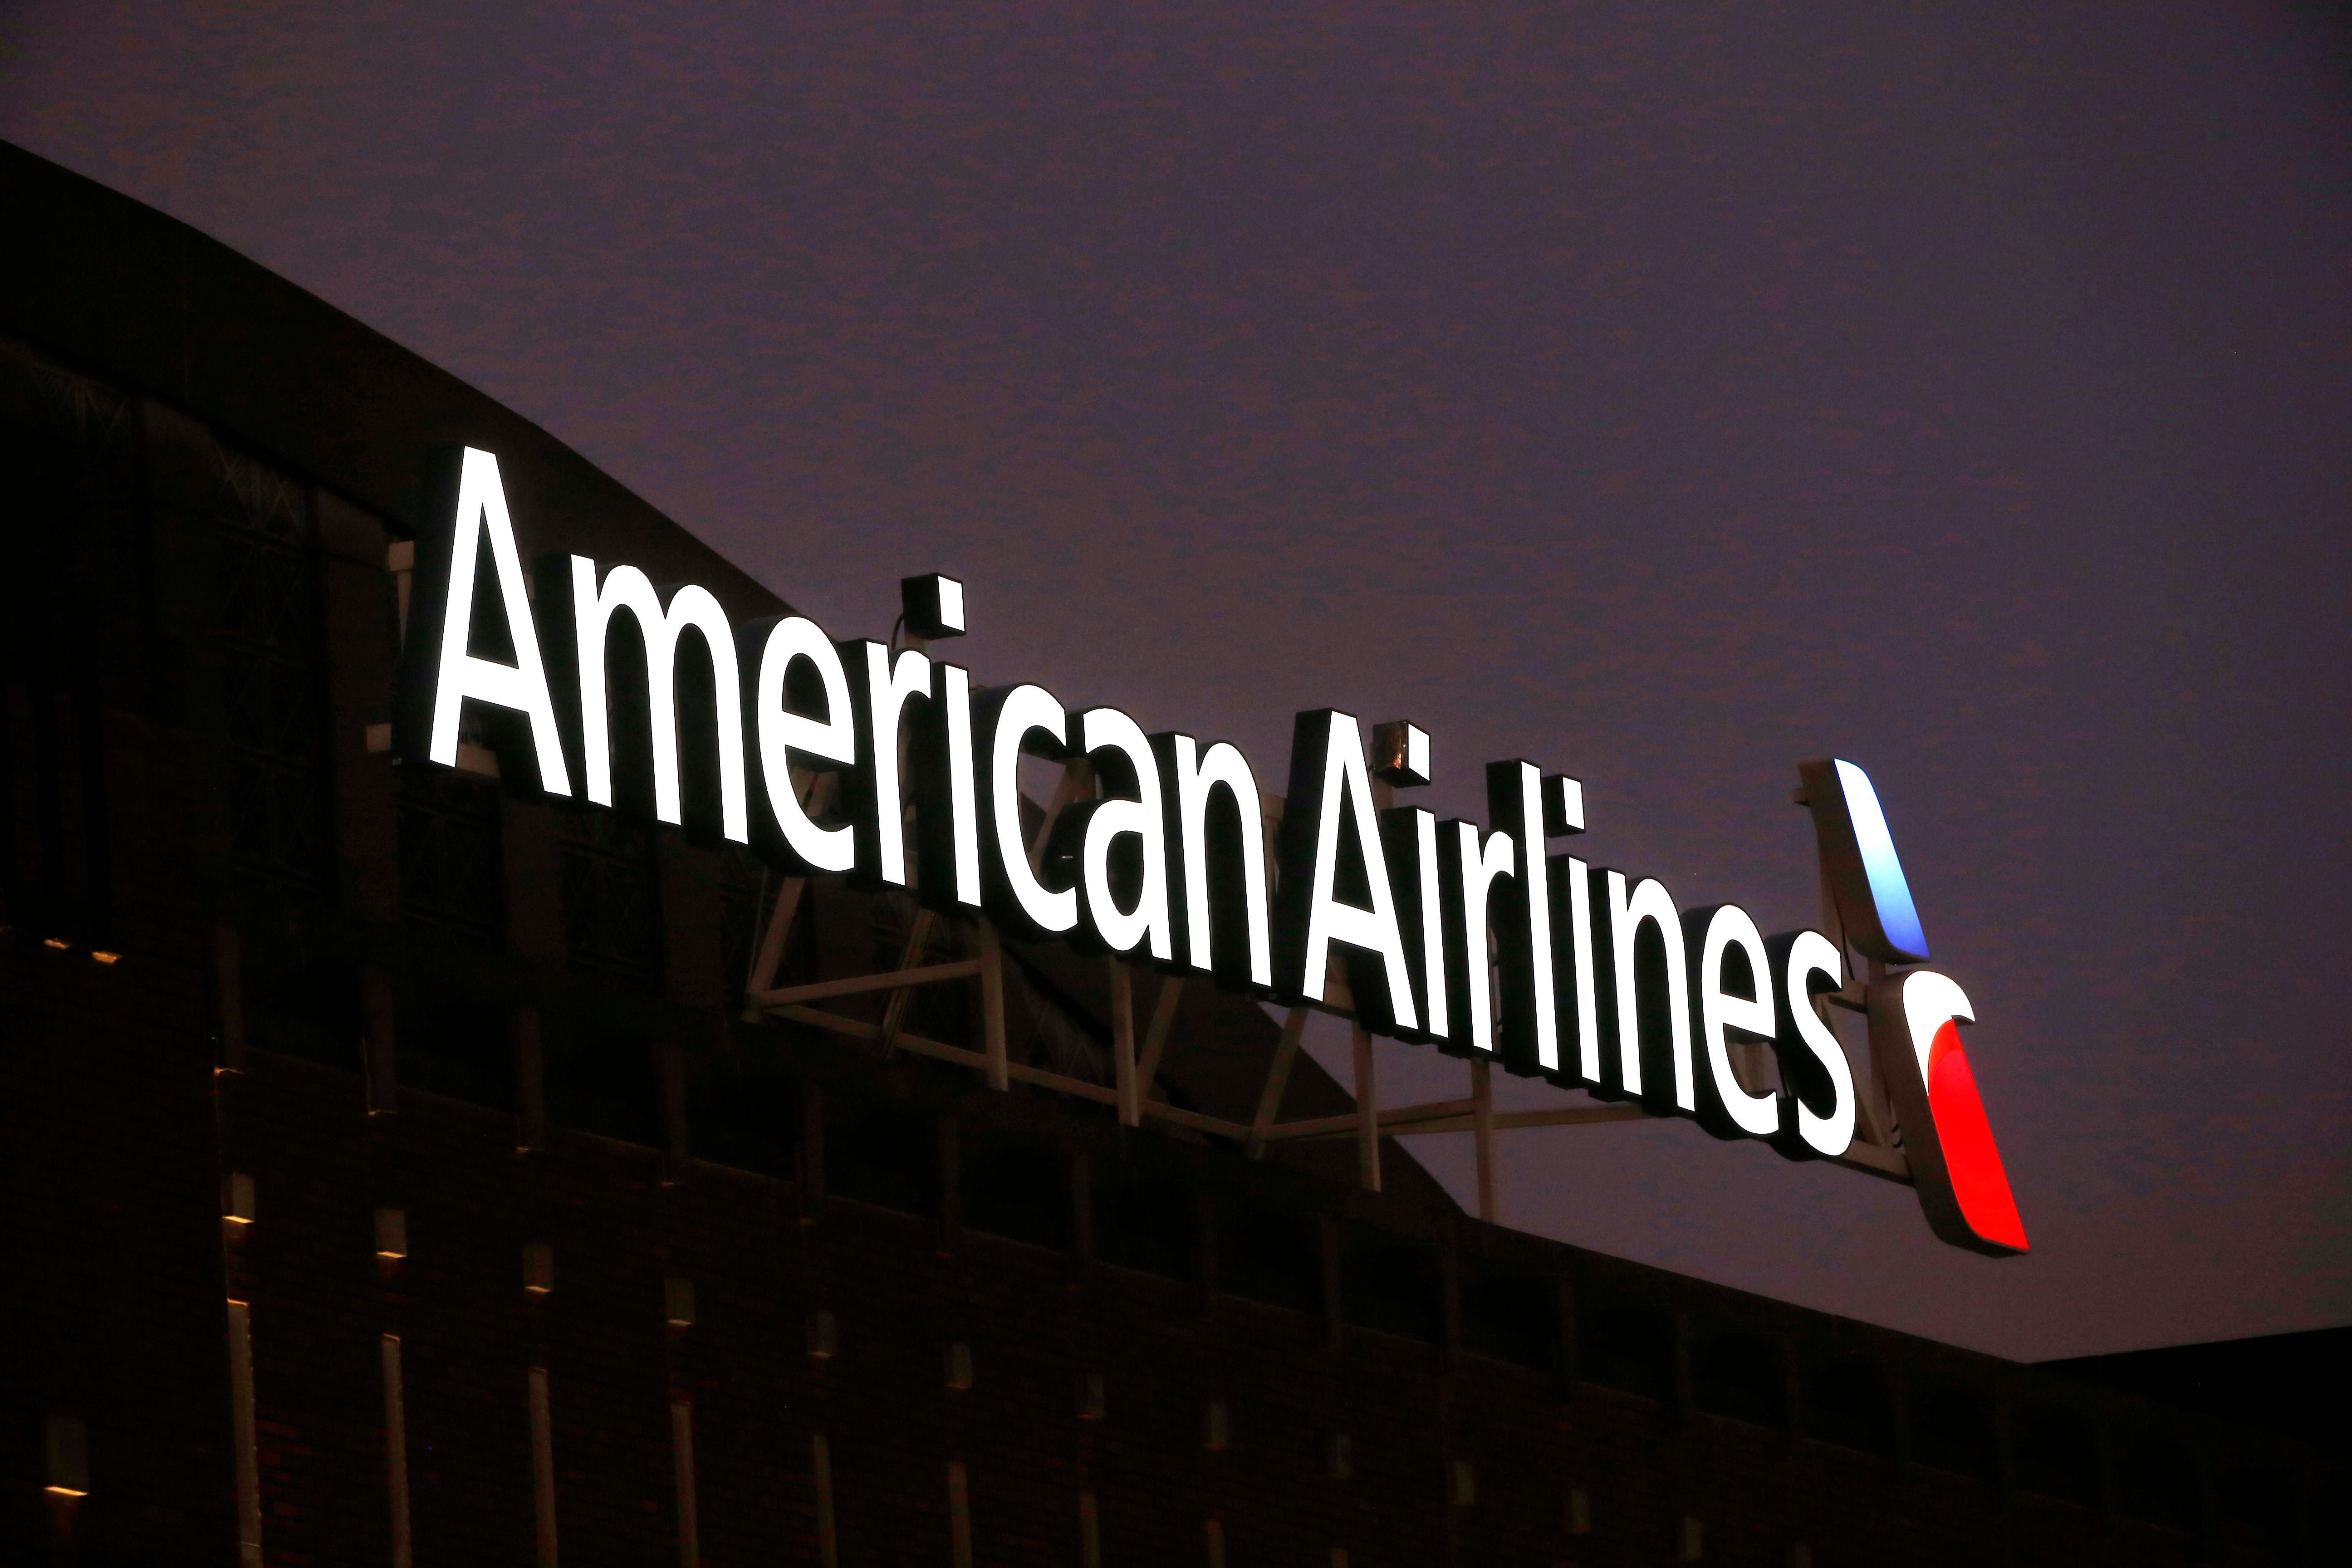 American Airlines did not confirm details of the incident, but issued a statement saying it faced a ‘disruption on board’ a flight bound for Delhi